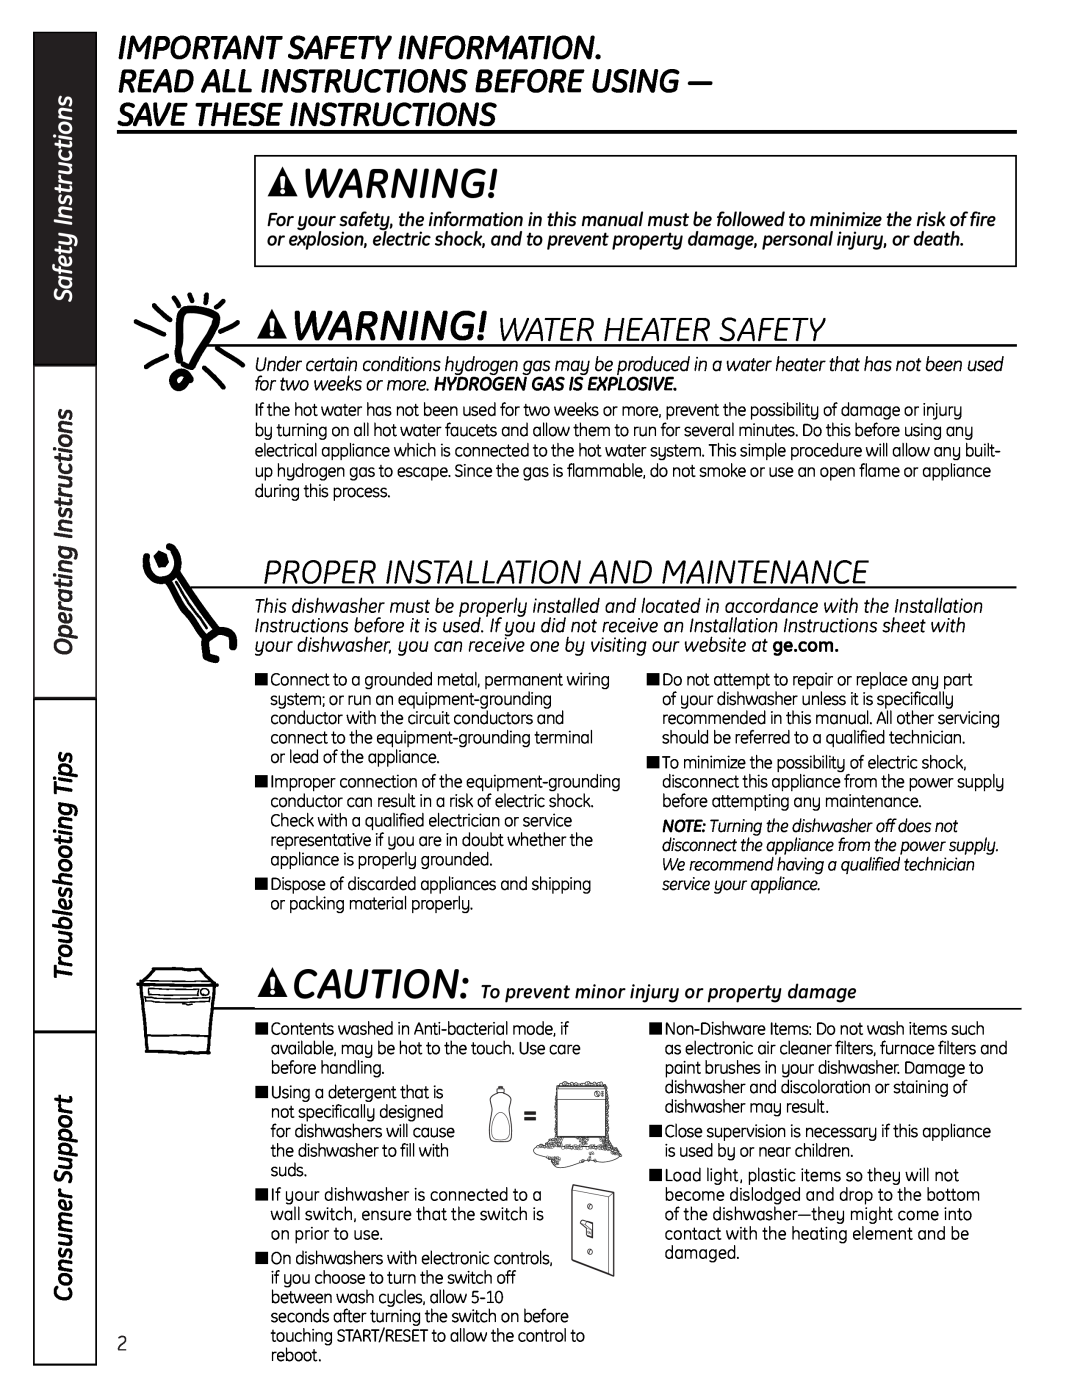 GE EDW5000 Important Safety Information Read All Instructions Before Using, Save These Instructions, Safety Instructions 